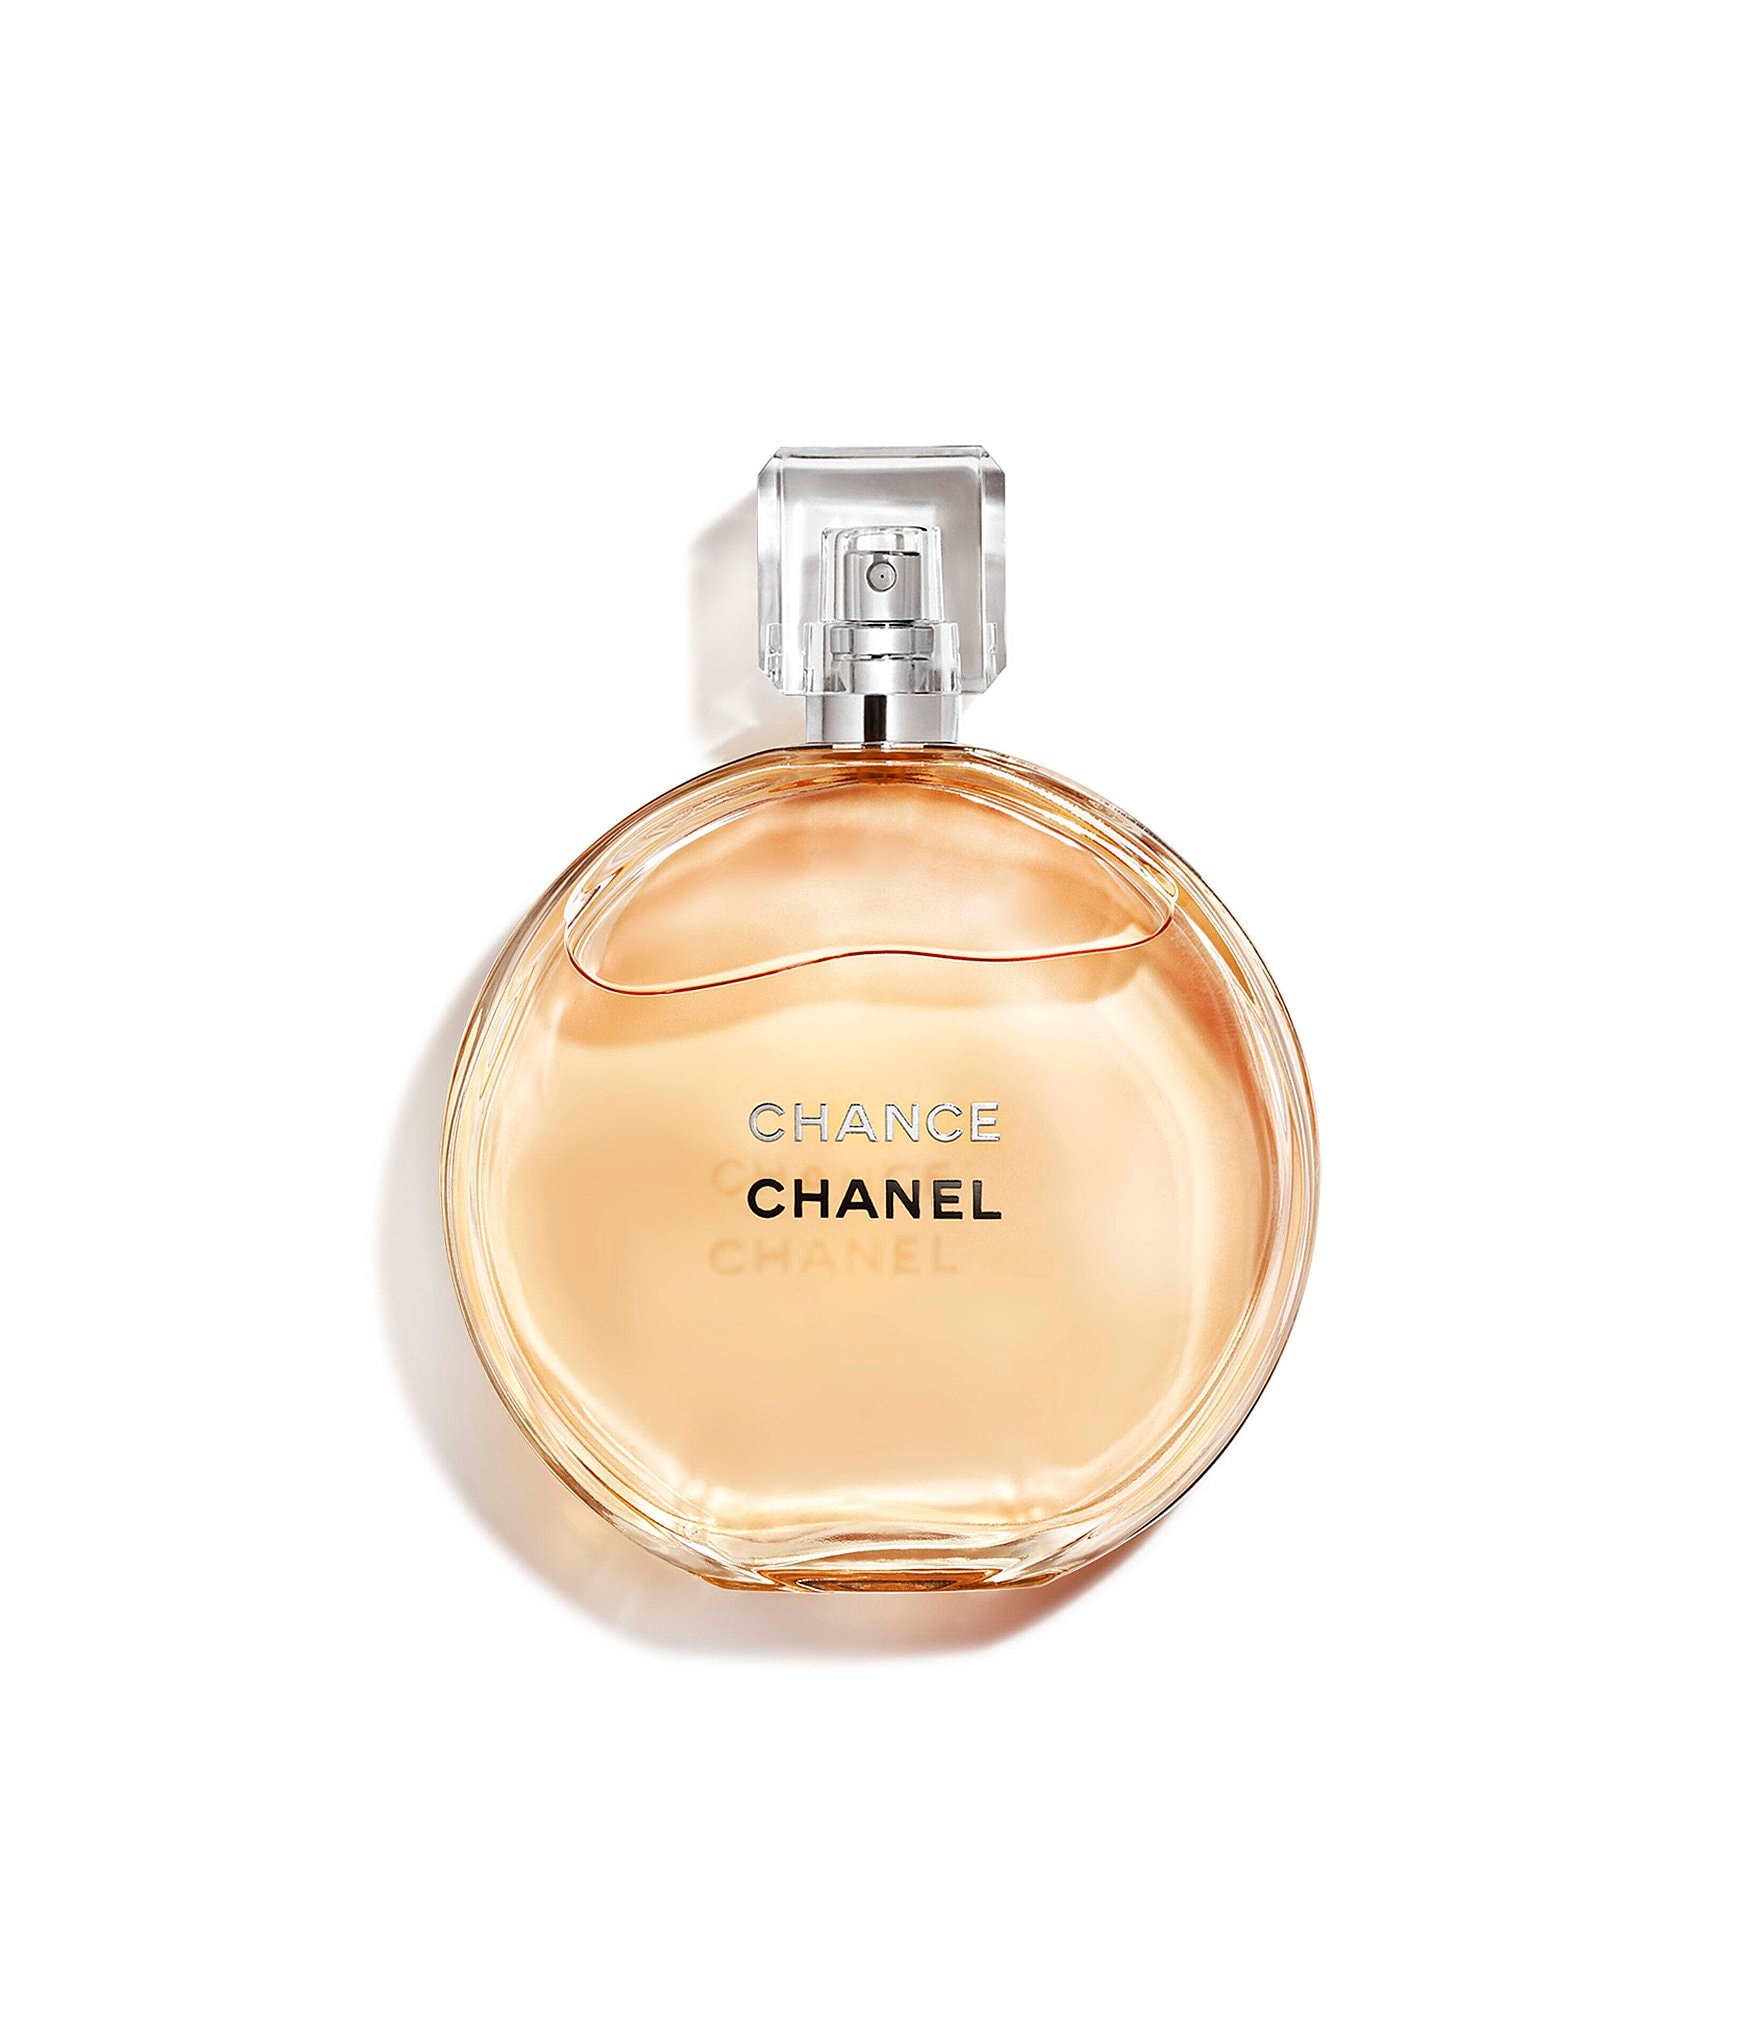 CHANEL - CHANCE Unpredictable by nature. Candid, sincere and joyful. Go  with the optimism of CHANCE.